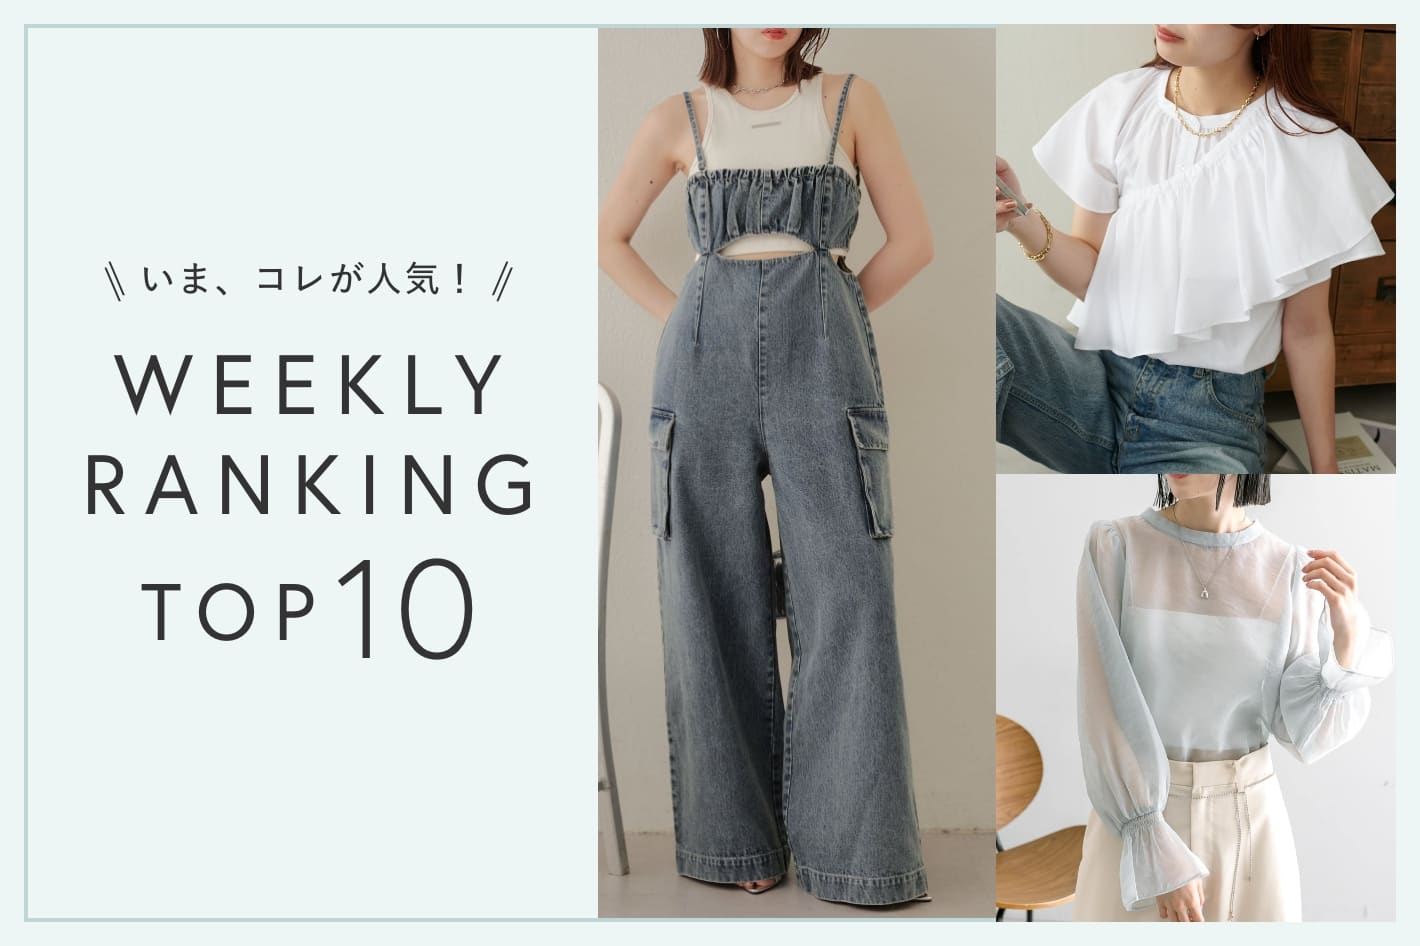 OUTLET いま、これが人気！WEEKLY RANKING TOP10！【7/3更新】